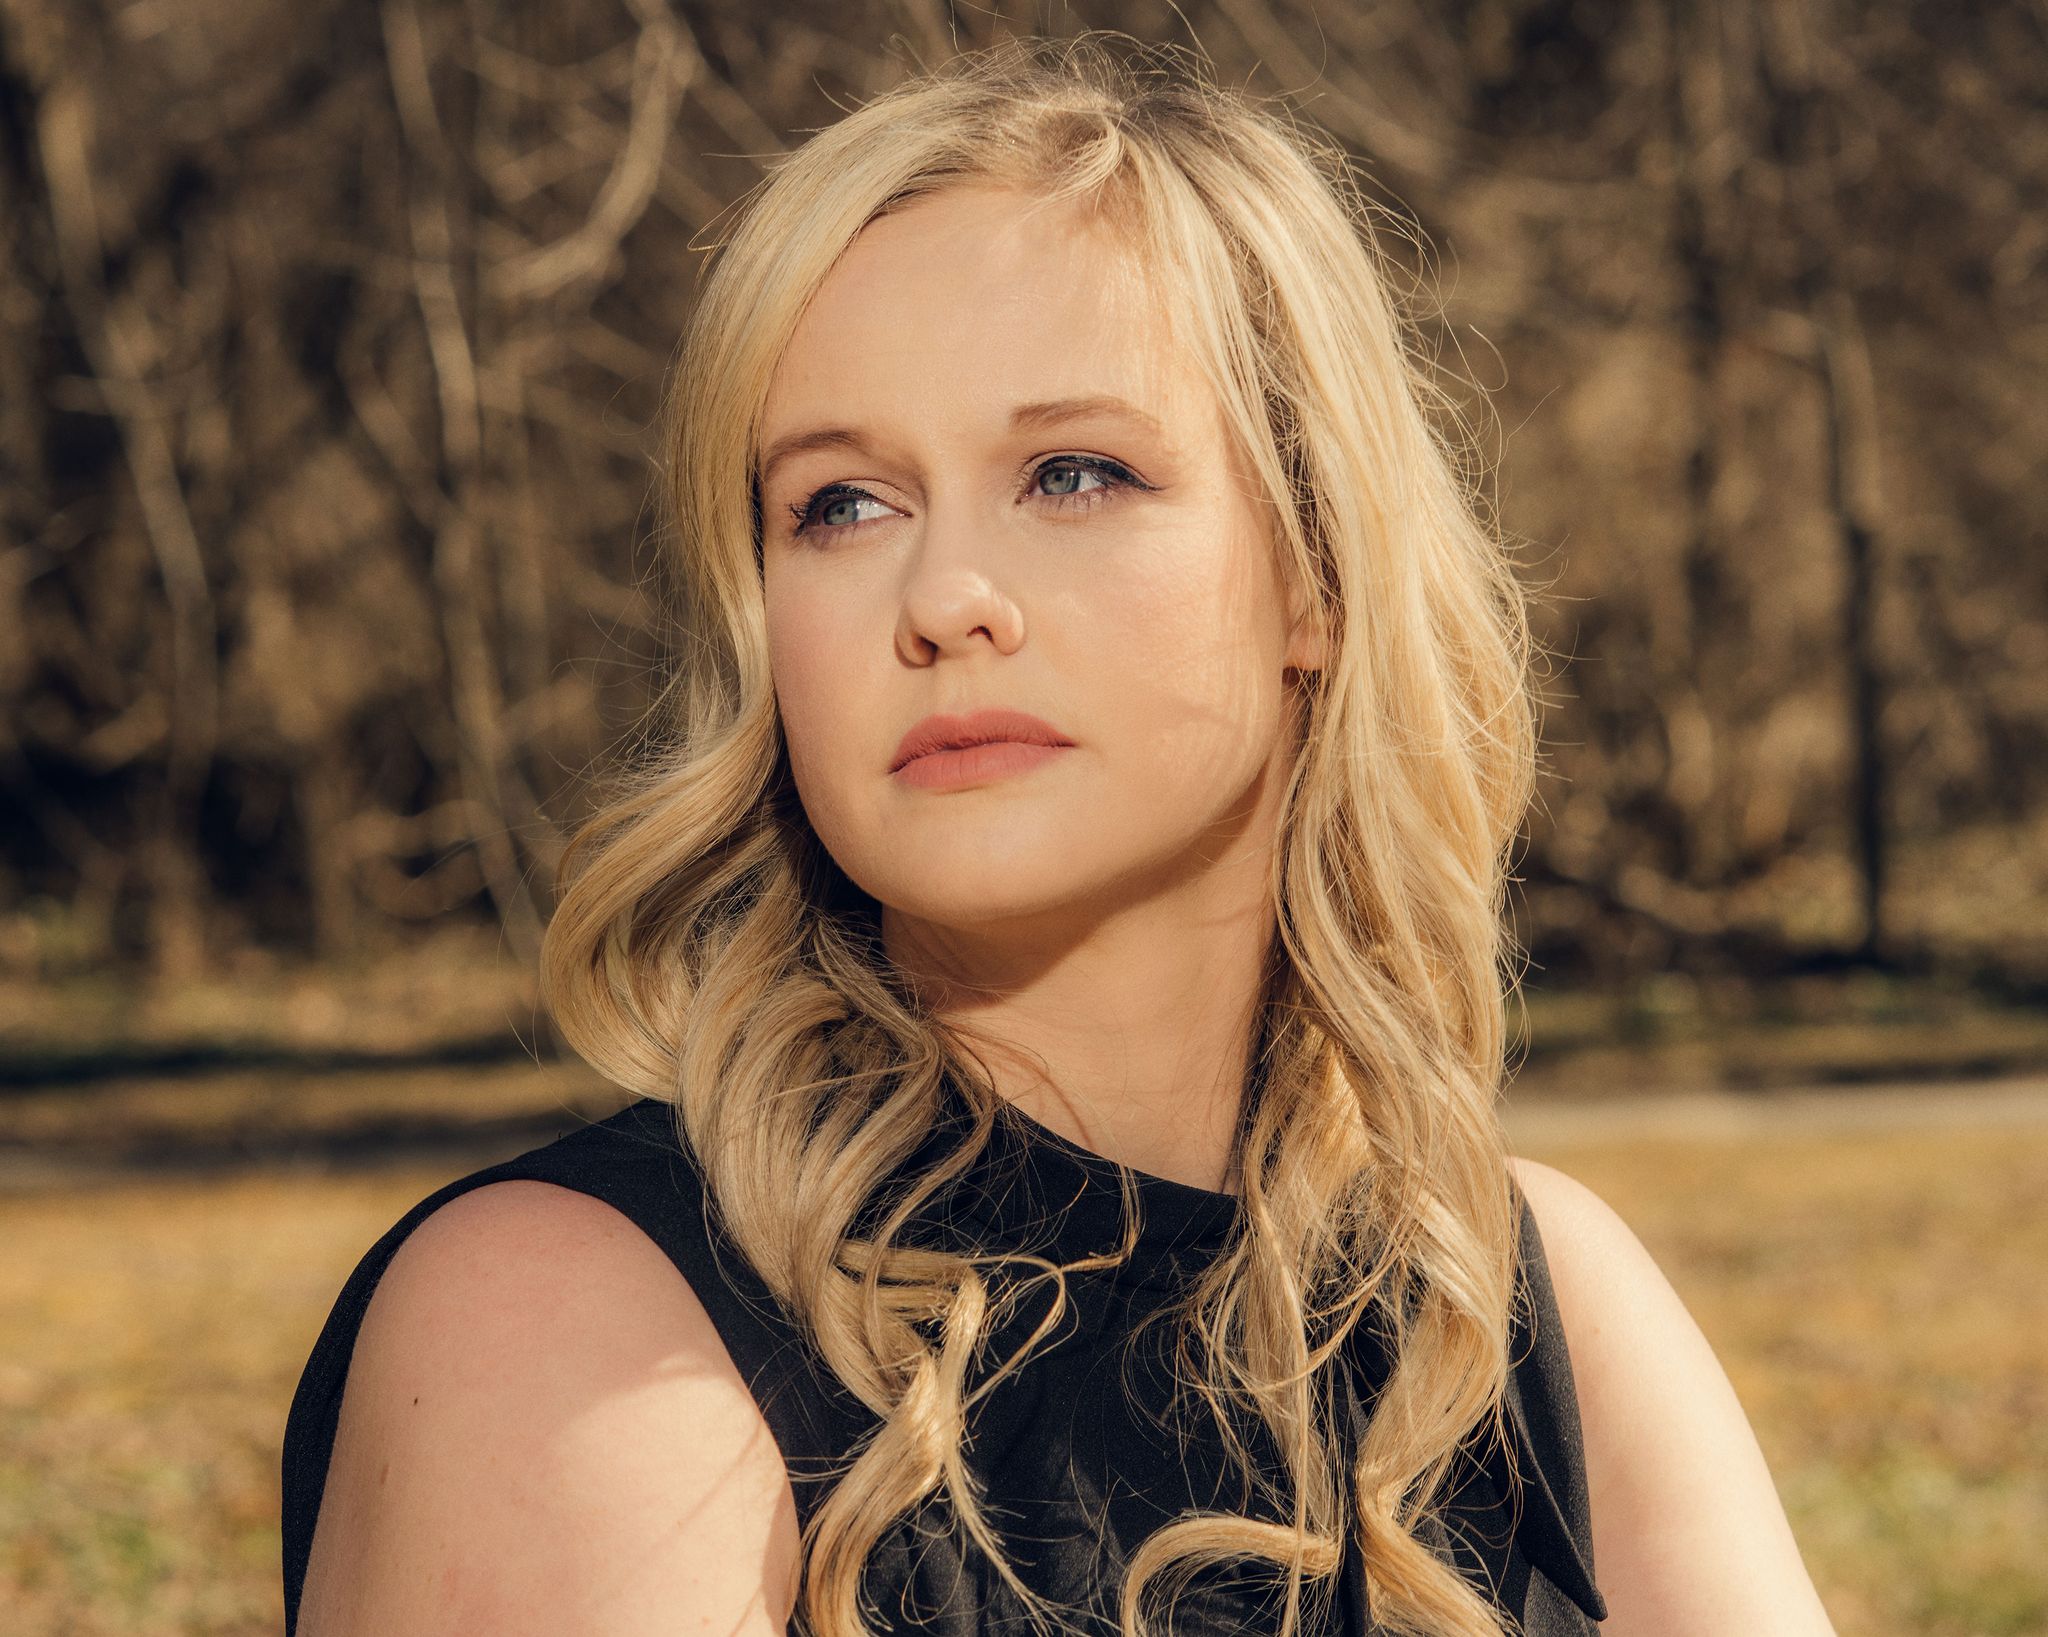 rebekah jones, unsmiling, wearing a black sleeveless dress with a small bow at the collar, sitting in front of a line of trees with bare branches